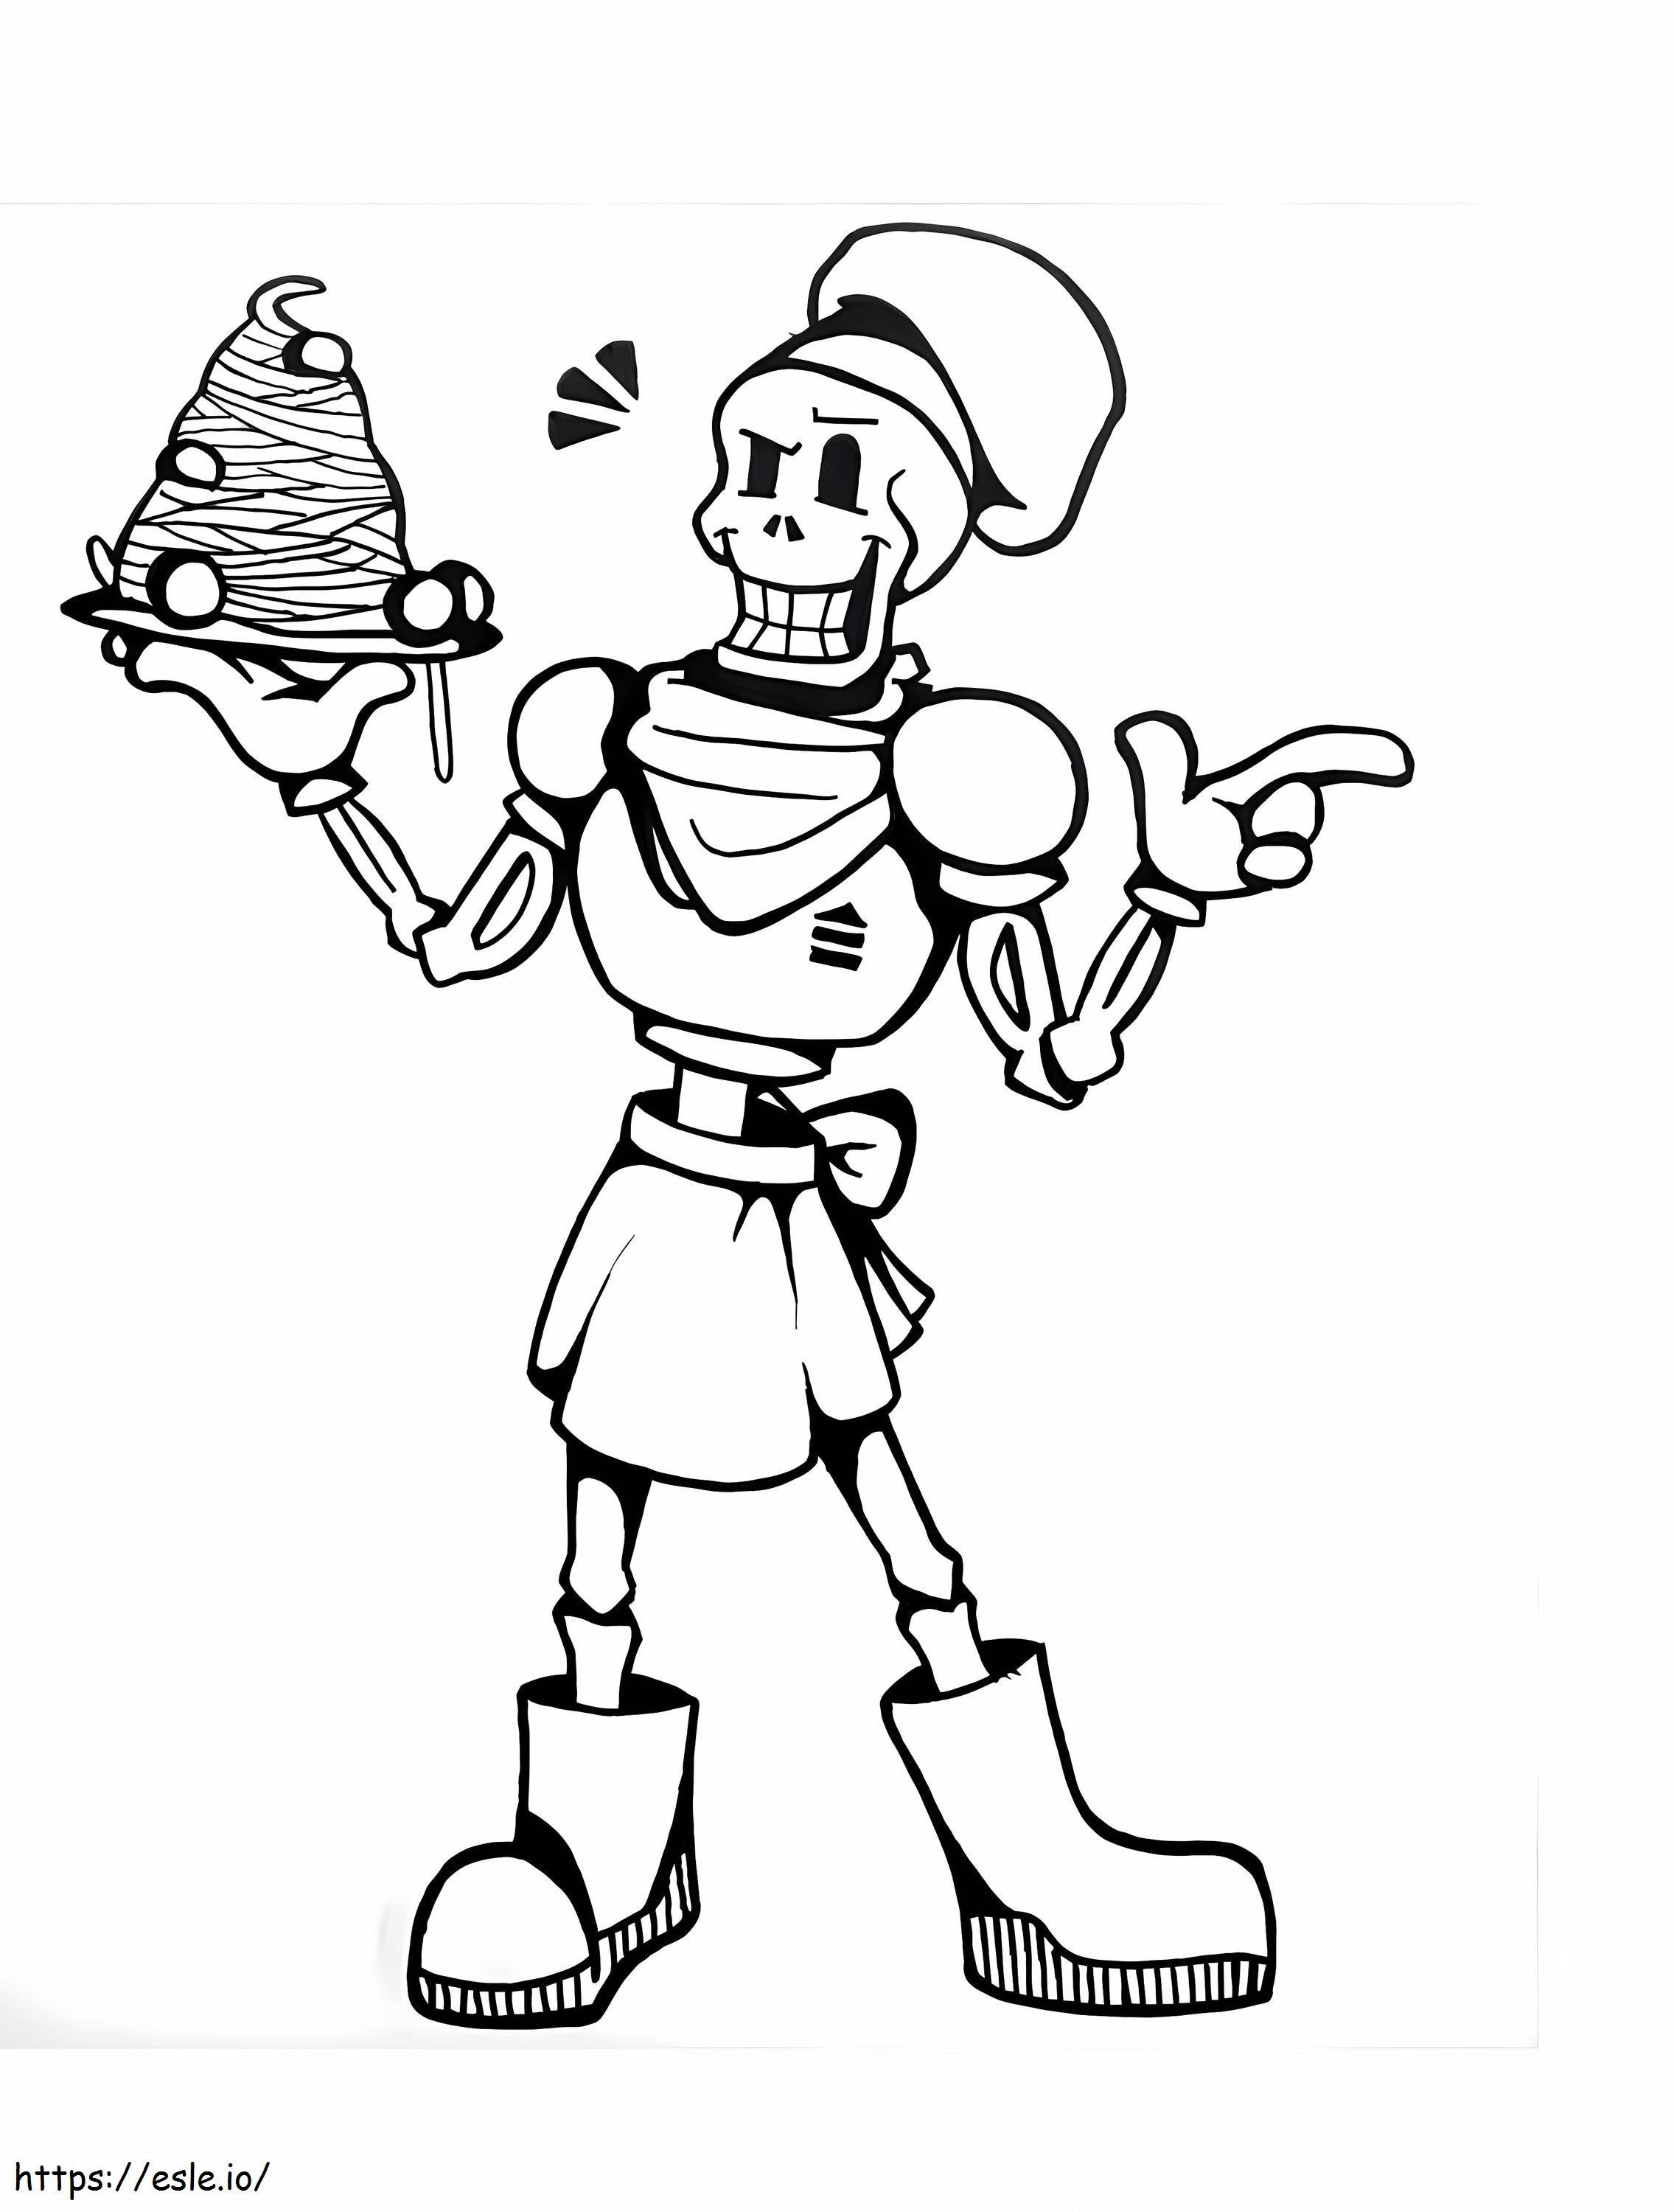 Chef Papyrus coloring page